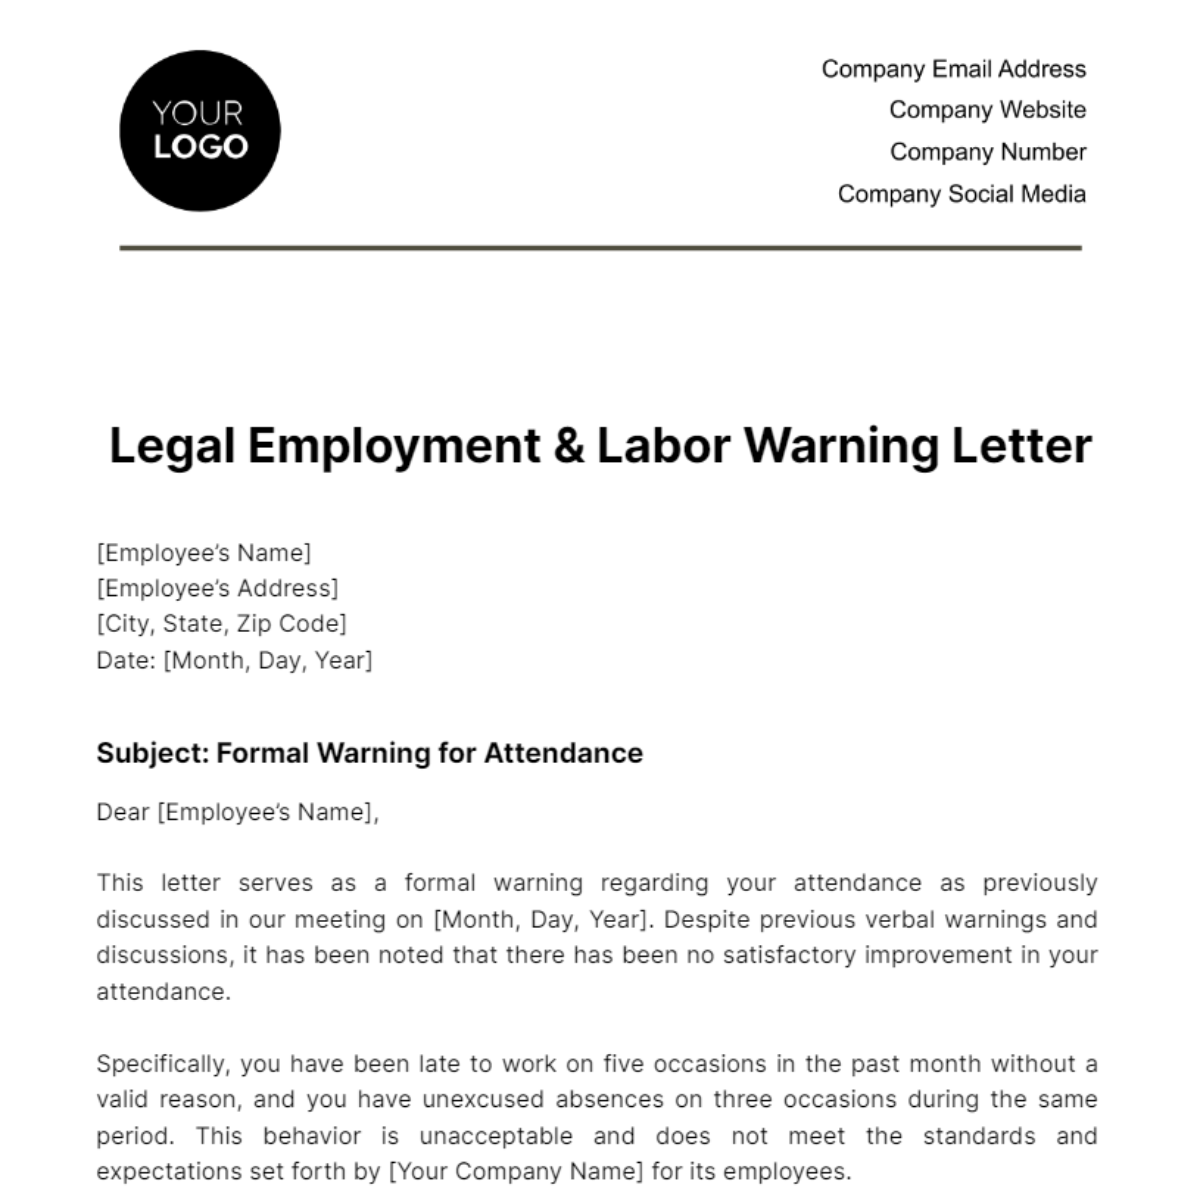 Legal Employment & Labor Warning Letter Template